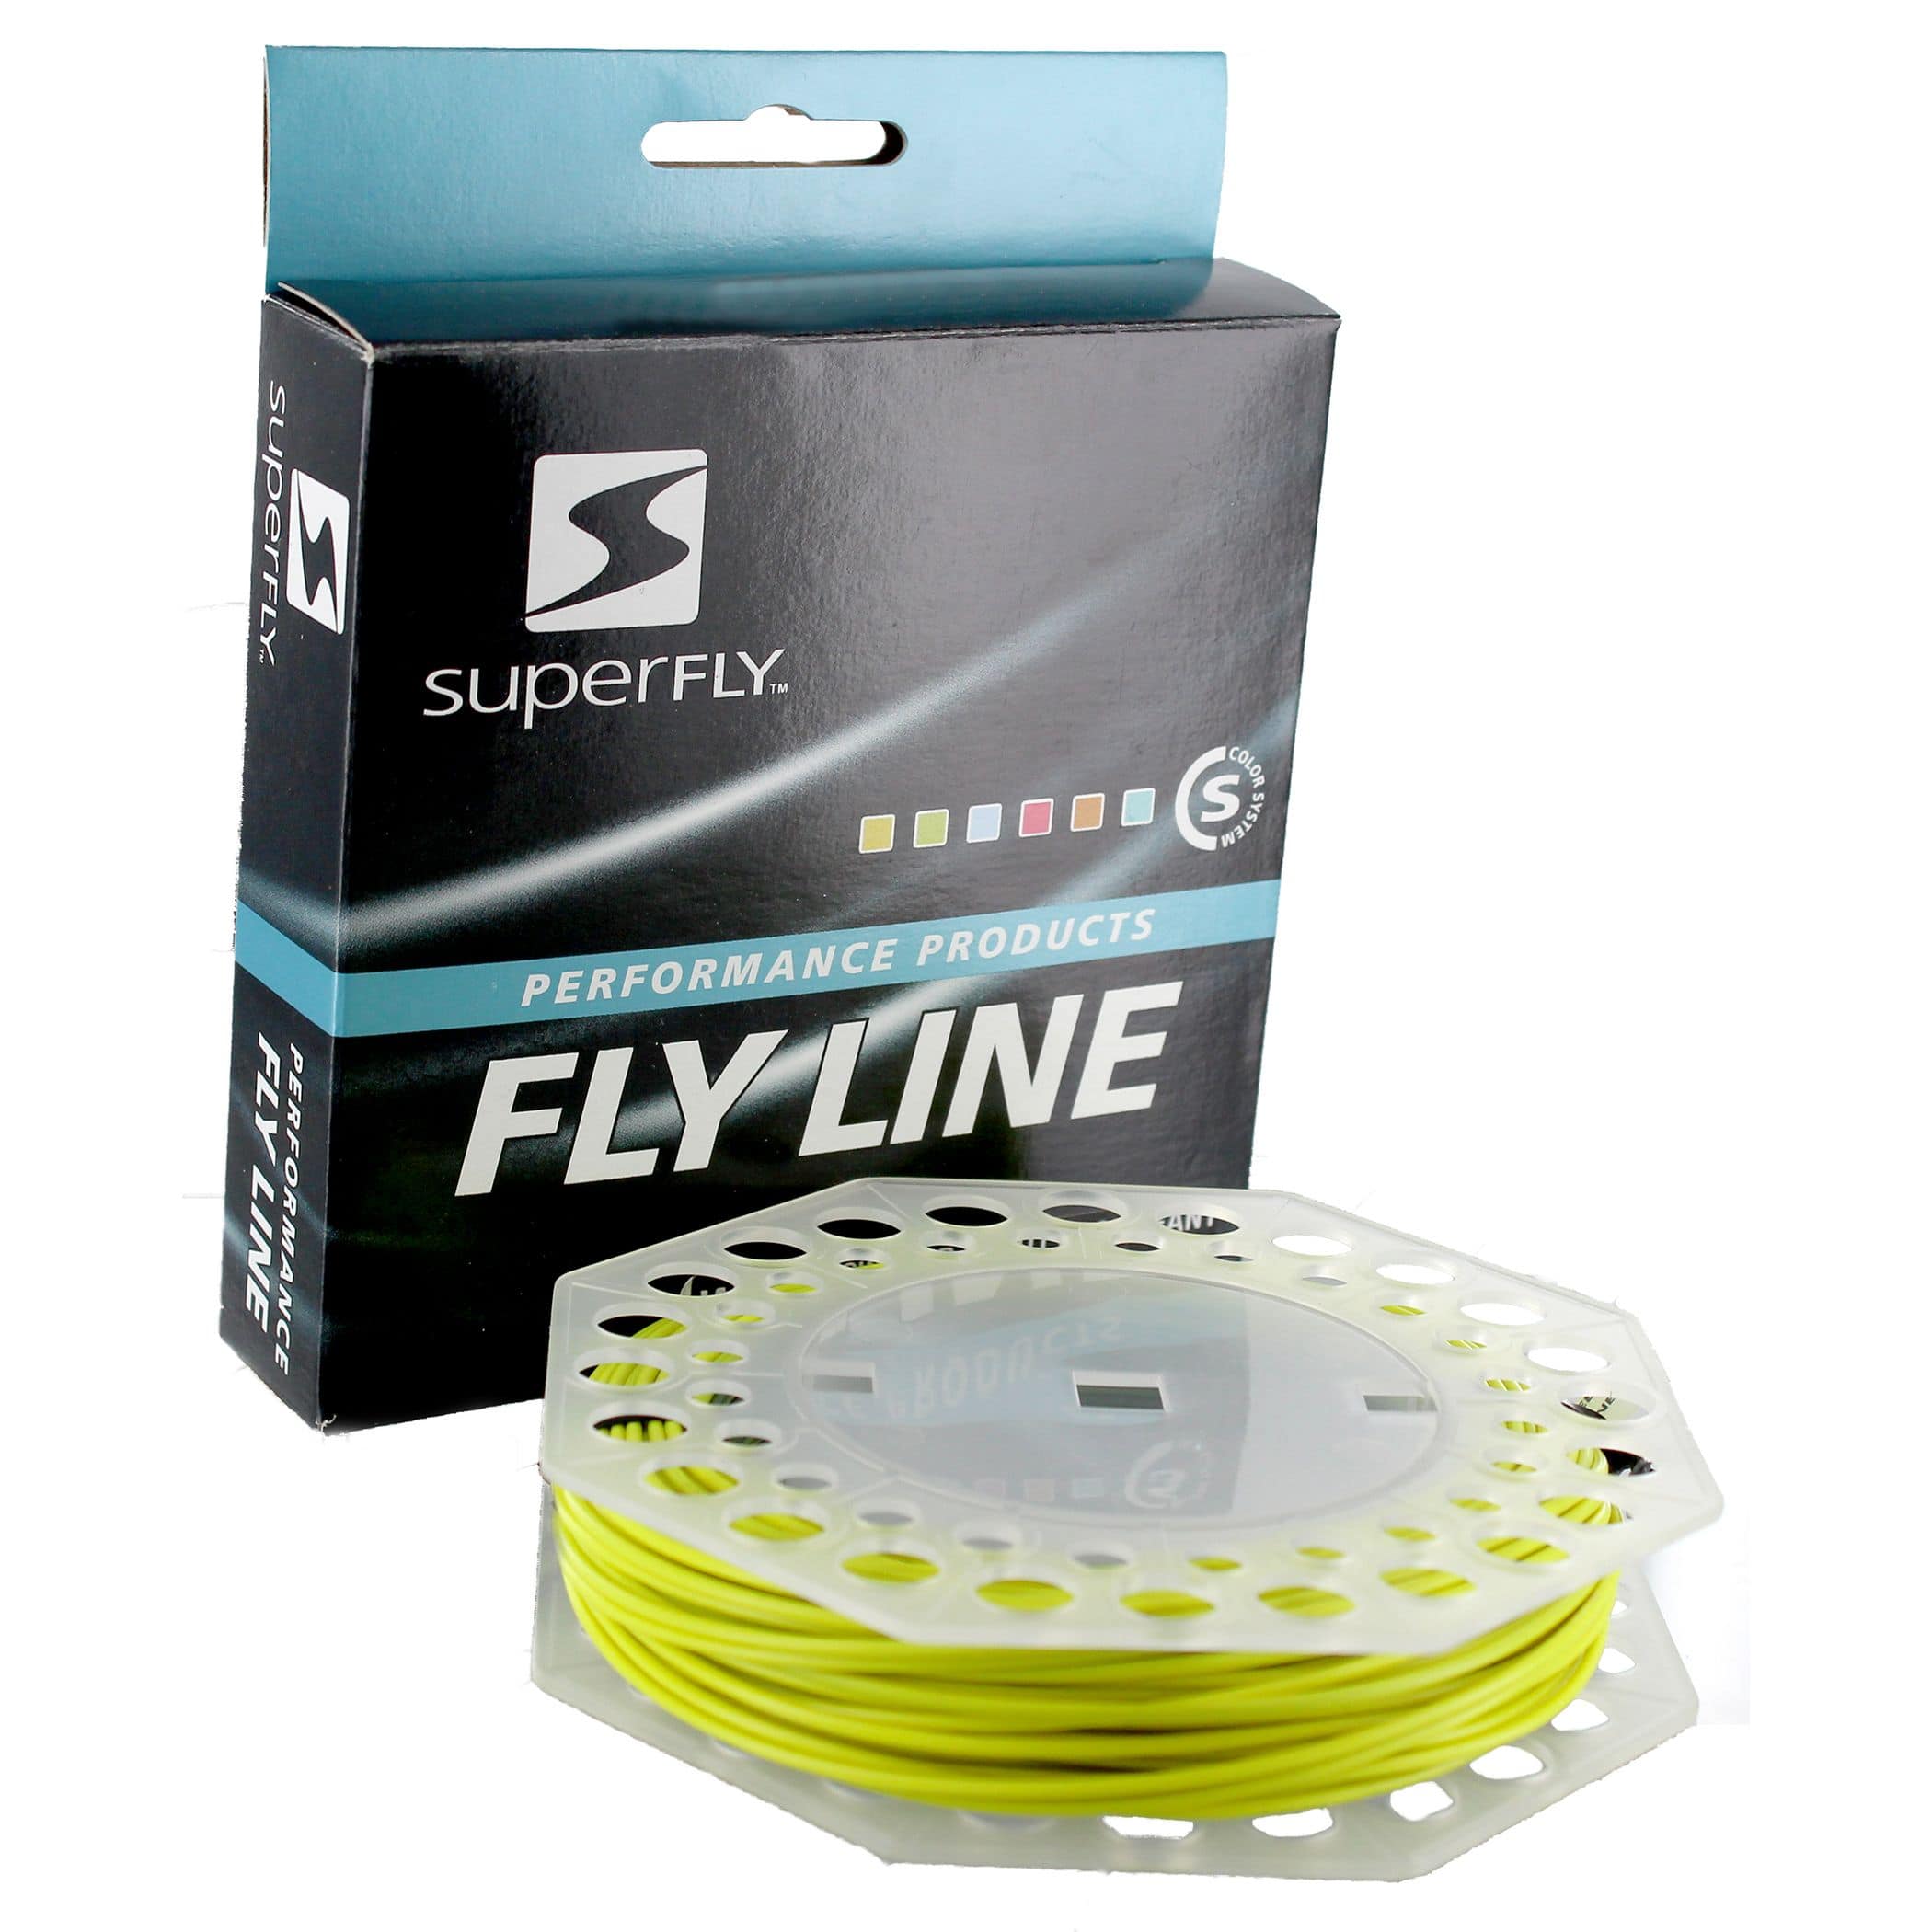 https://media-www.canadiantire.ca/product/playing/fishing/fishing-equipment/1782153/superfly-performance-fly-line-with-sink-10-weight-14aad055-e81f-4e22-a70c-b0791244c198-jpgrendition.jpg